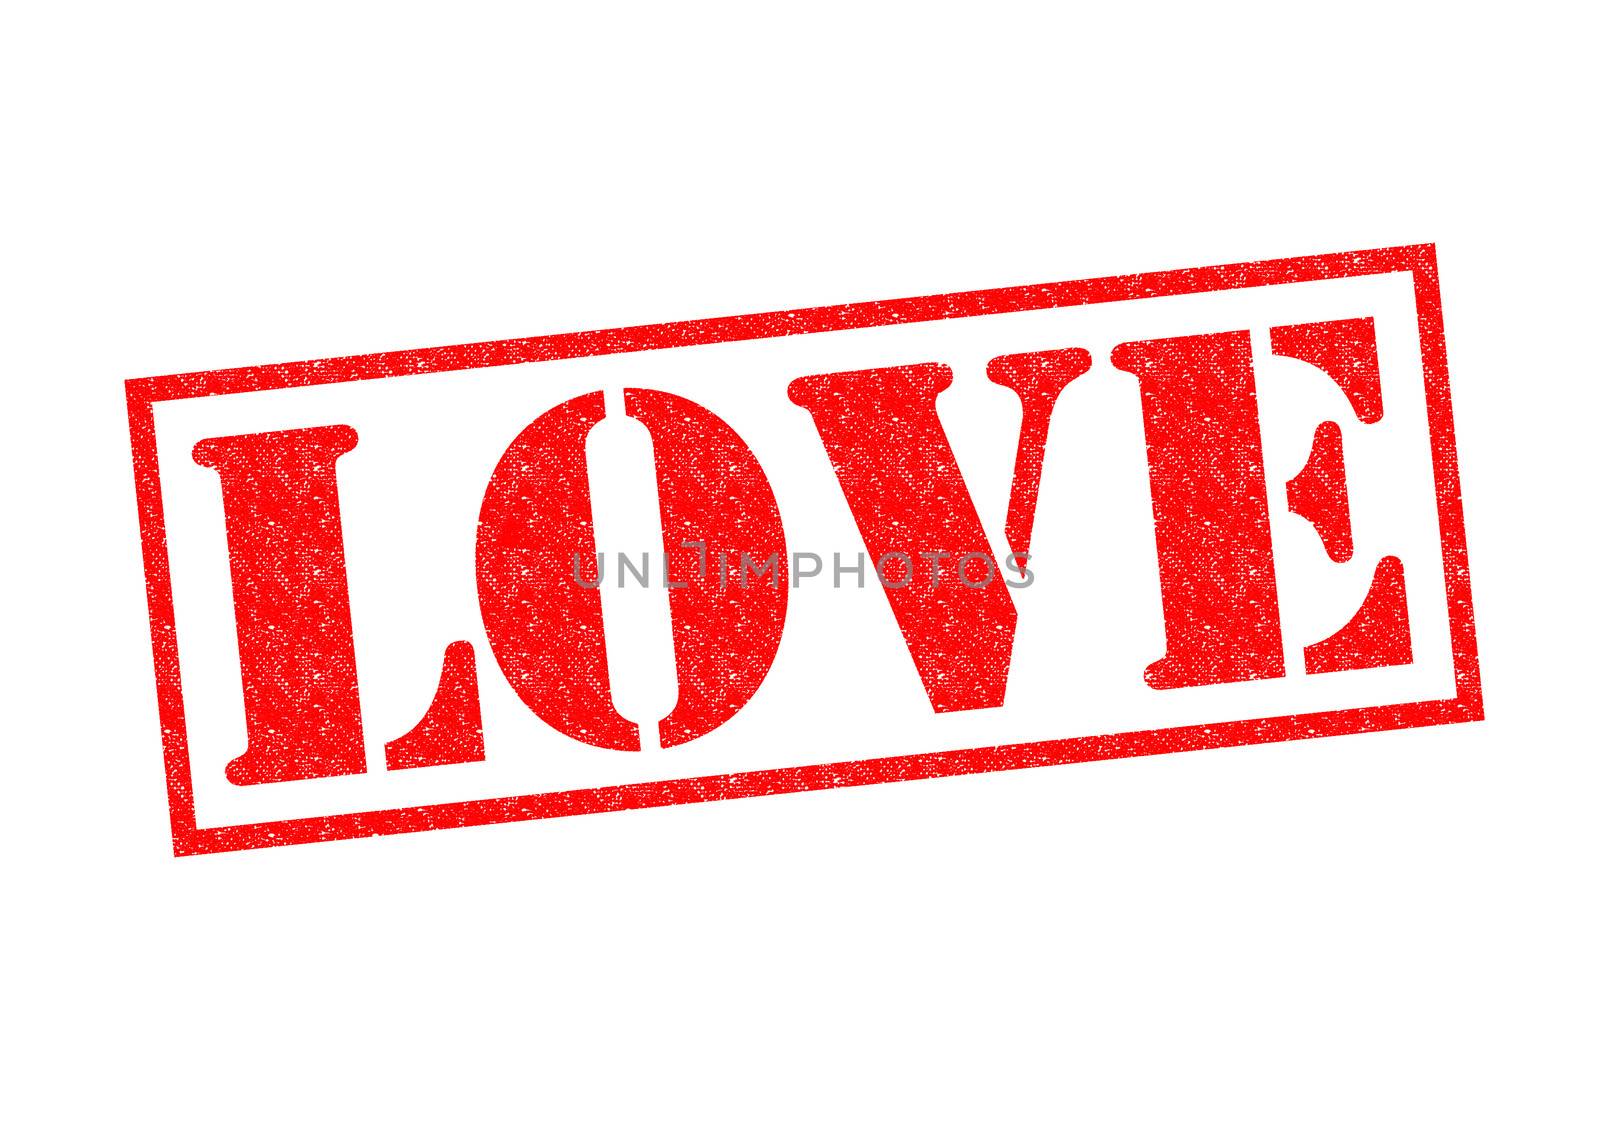 LOVE red Rubber Stamp over a white background.